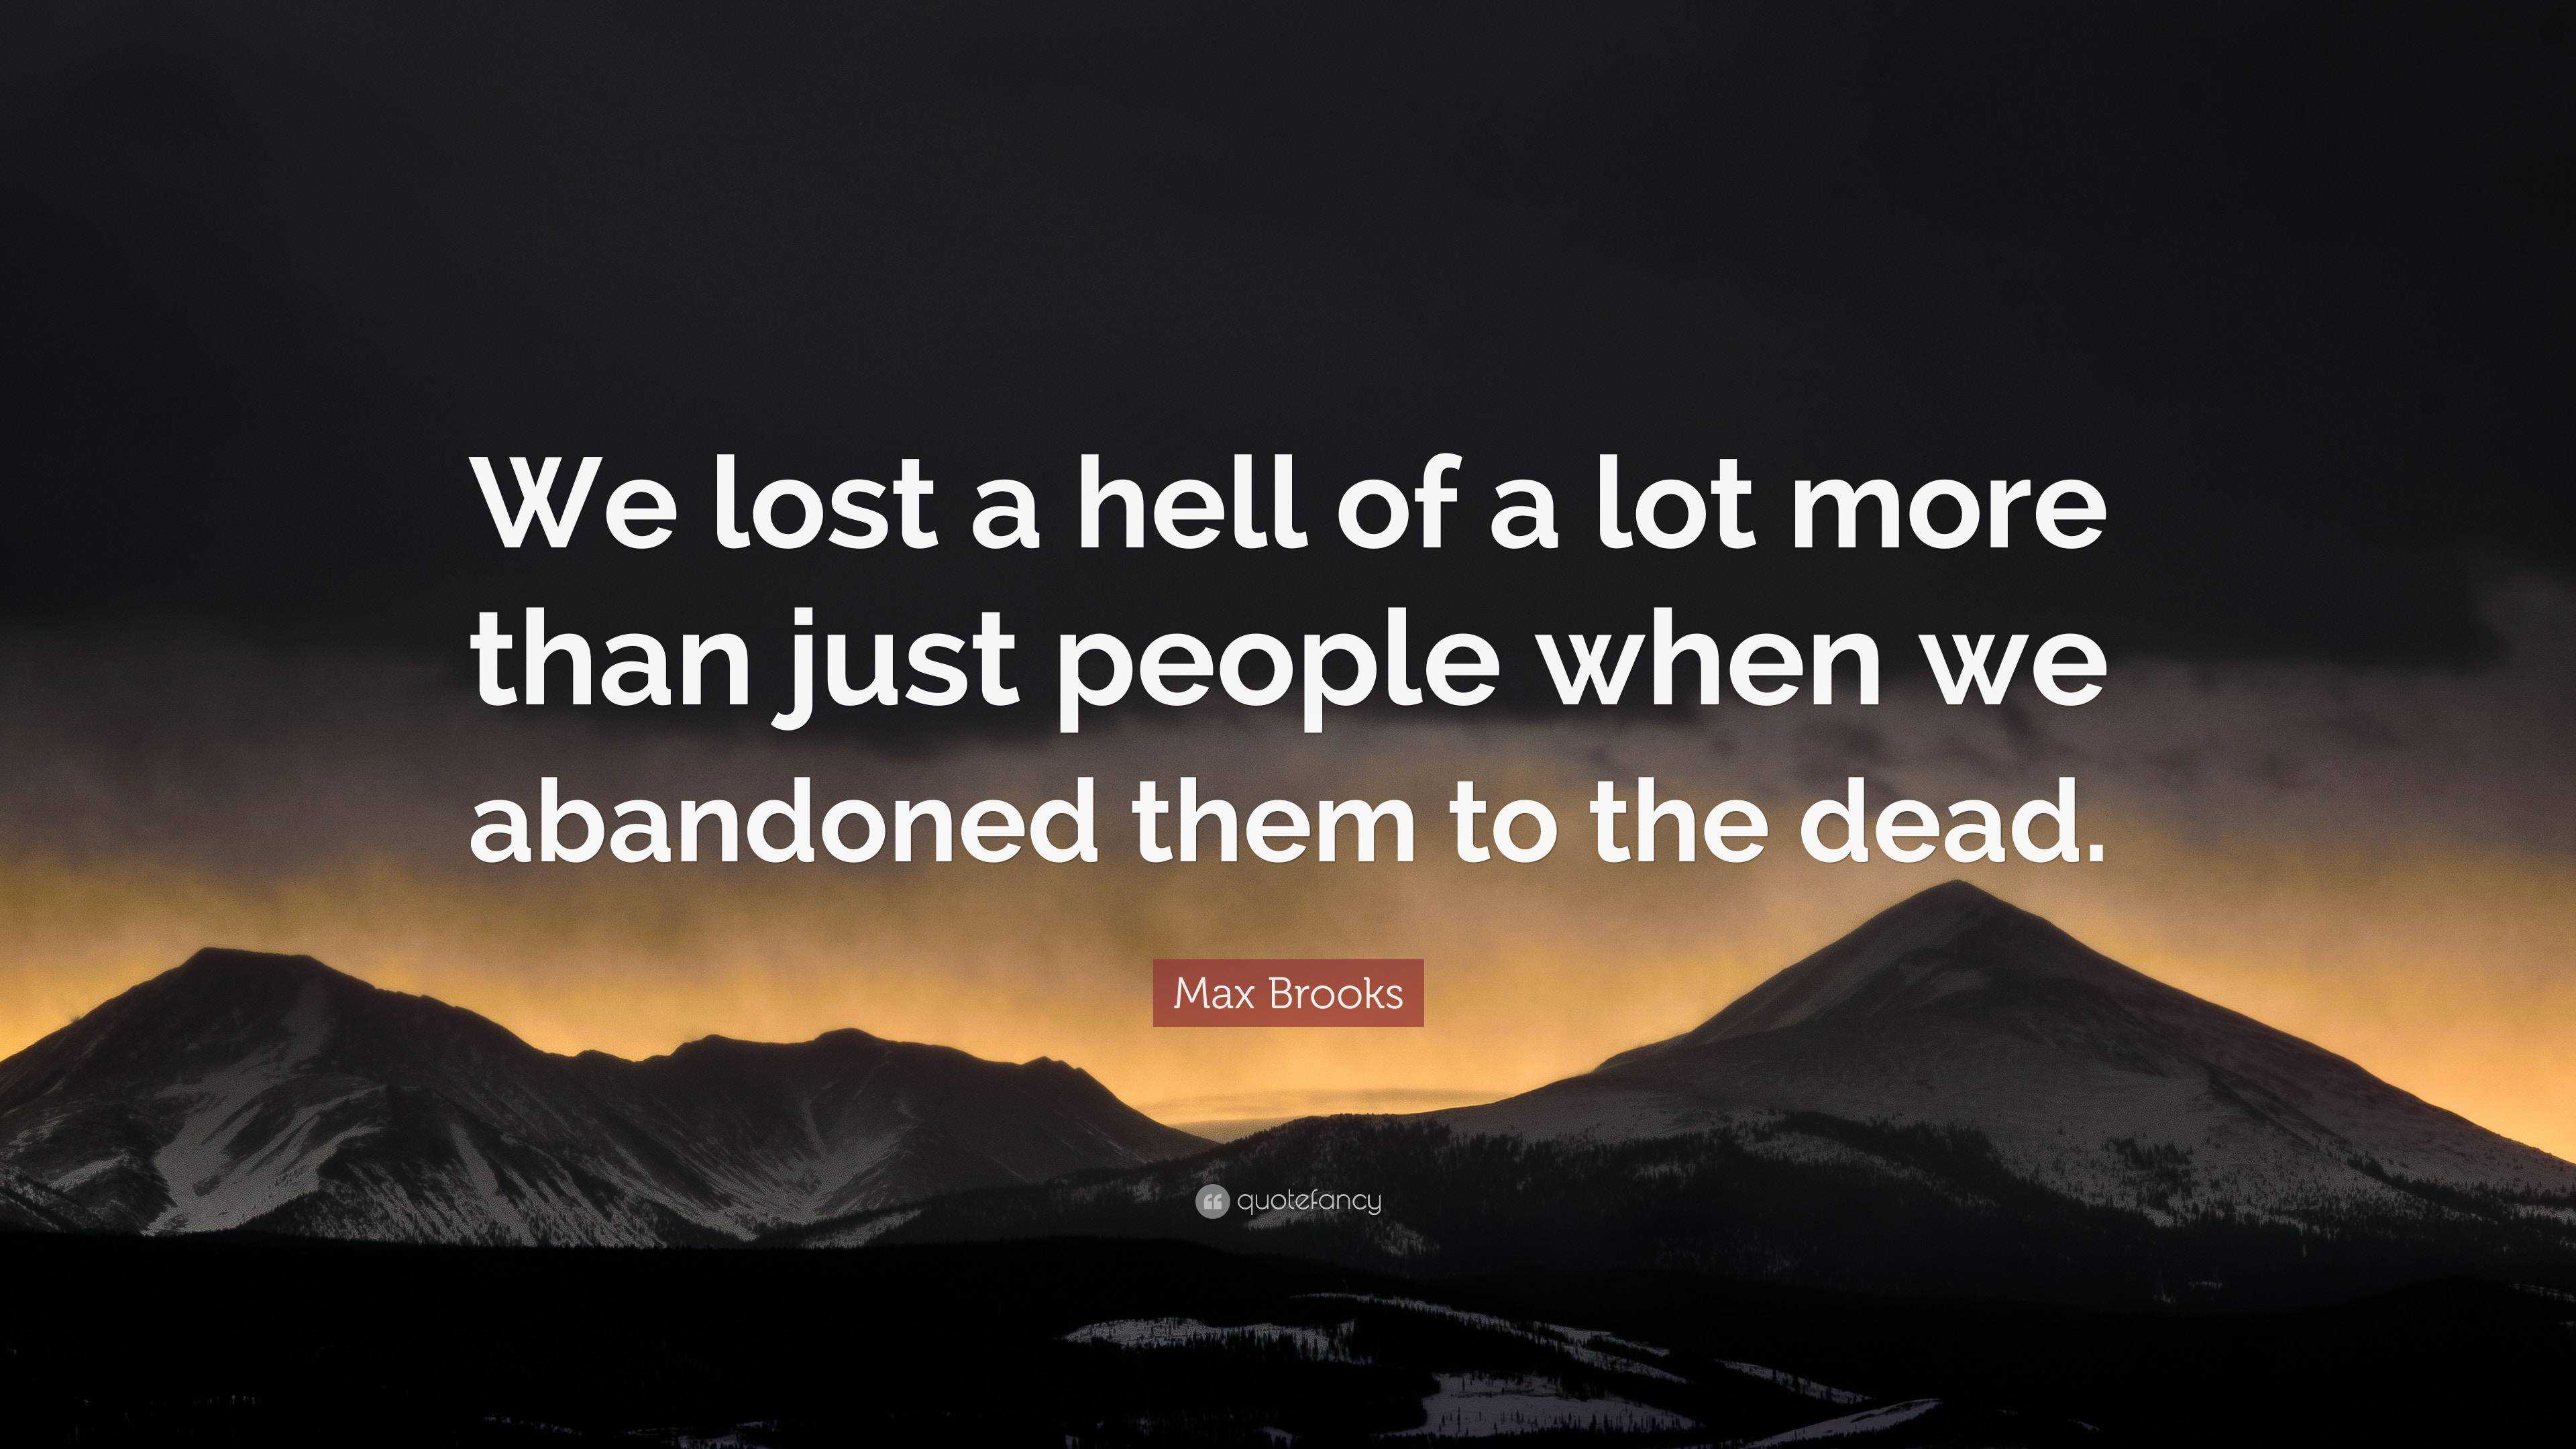 Max Brooks Quote We Lost A Hell Of A Lot More Than Just People When We Abandoned Them To The Dead 2 Wallpapers Quotefancy